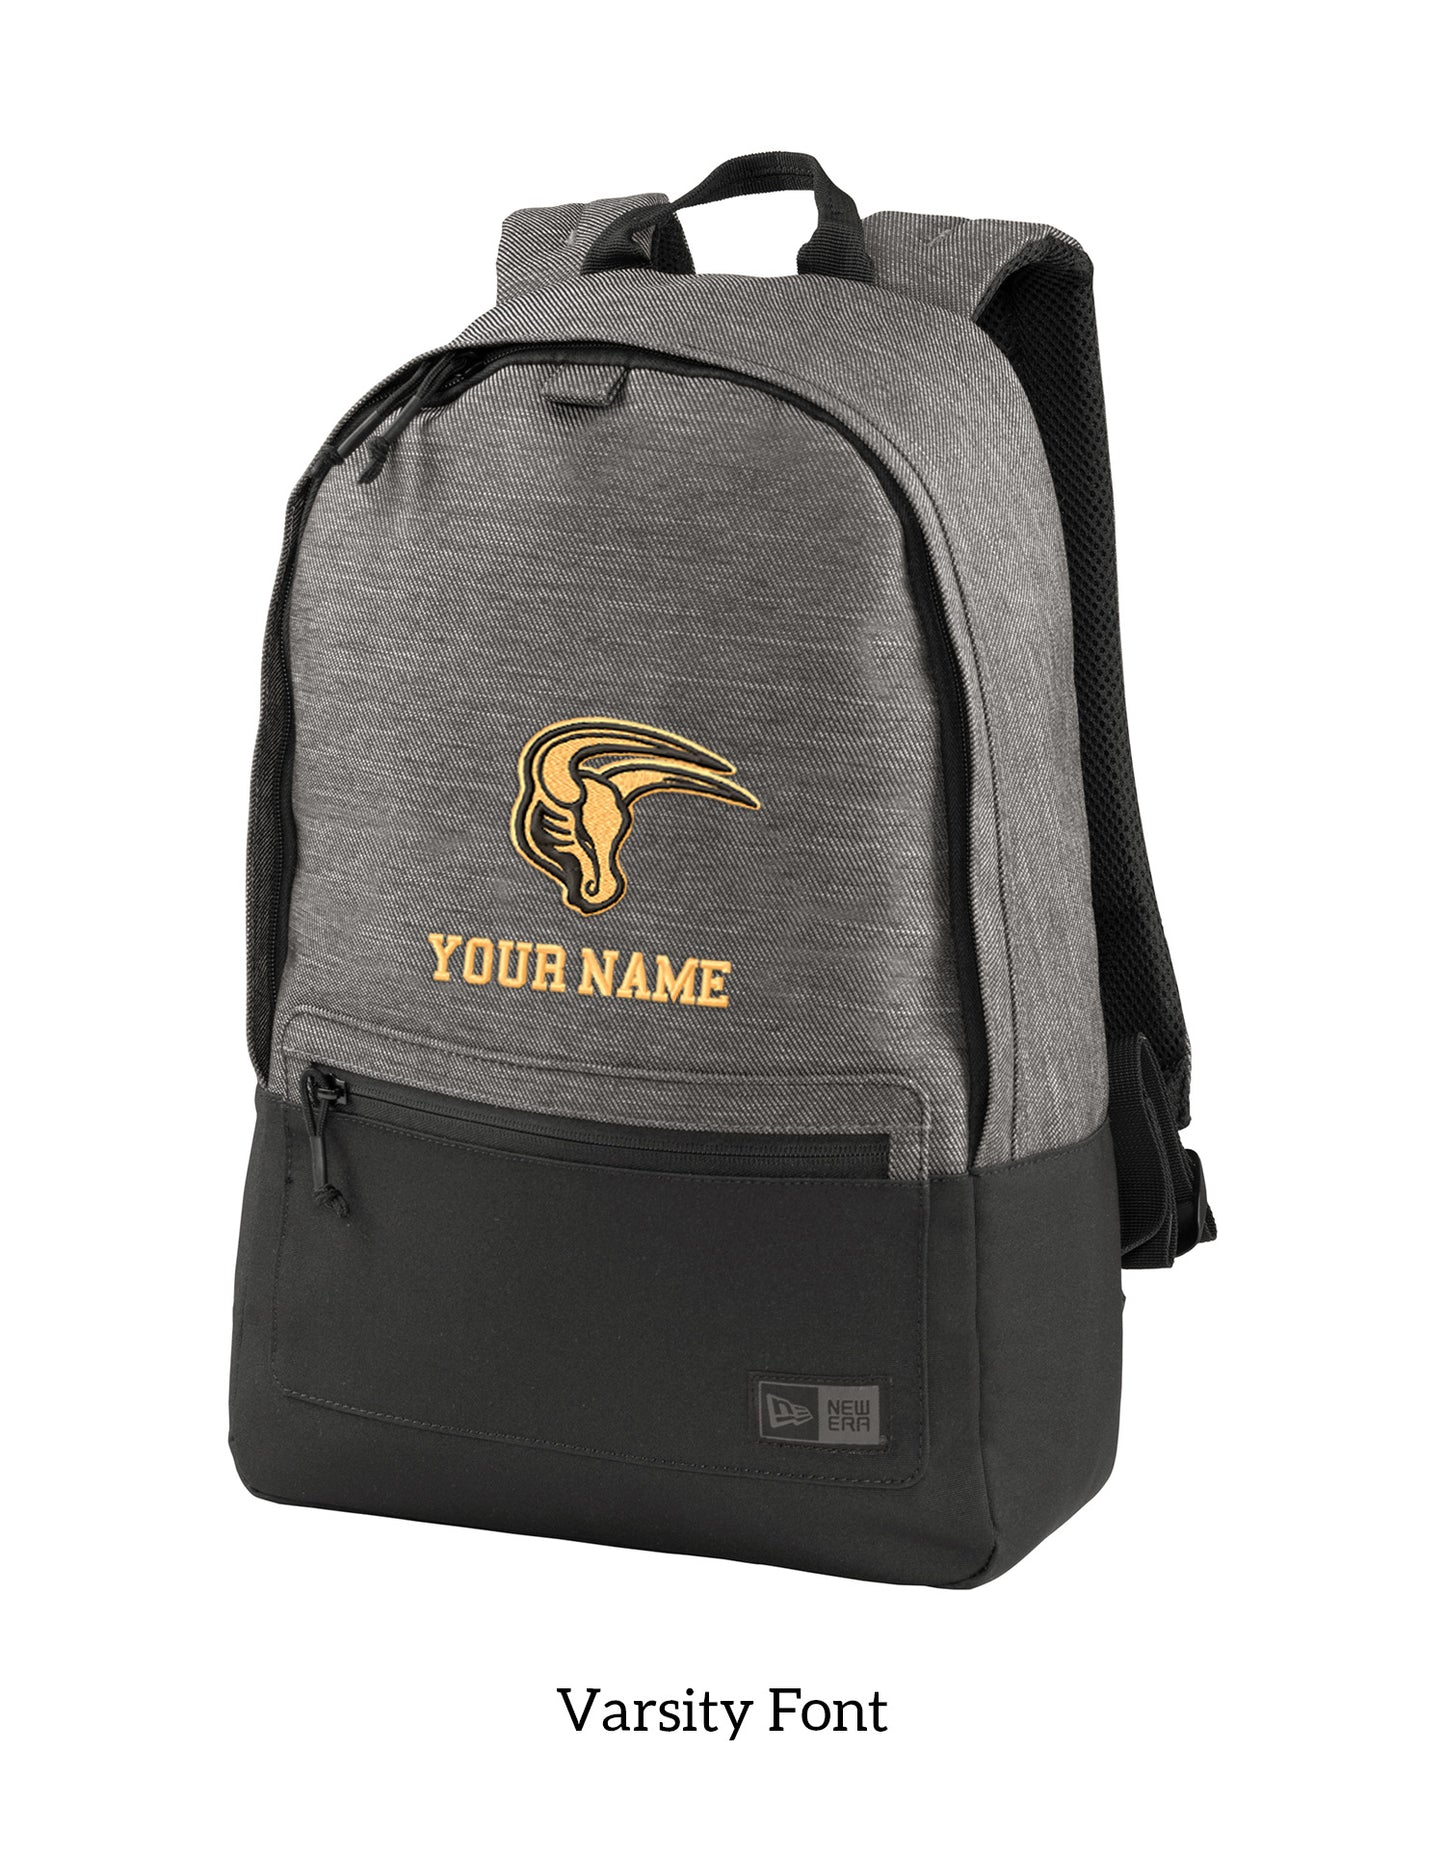 MSIS PTO-Maverick New Era Legacy Black and Grey Backpack with Embroidery Design, Personalize with your Name!